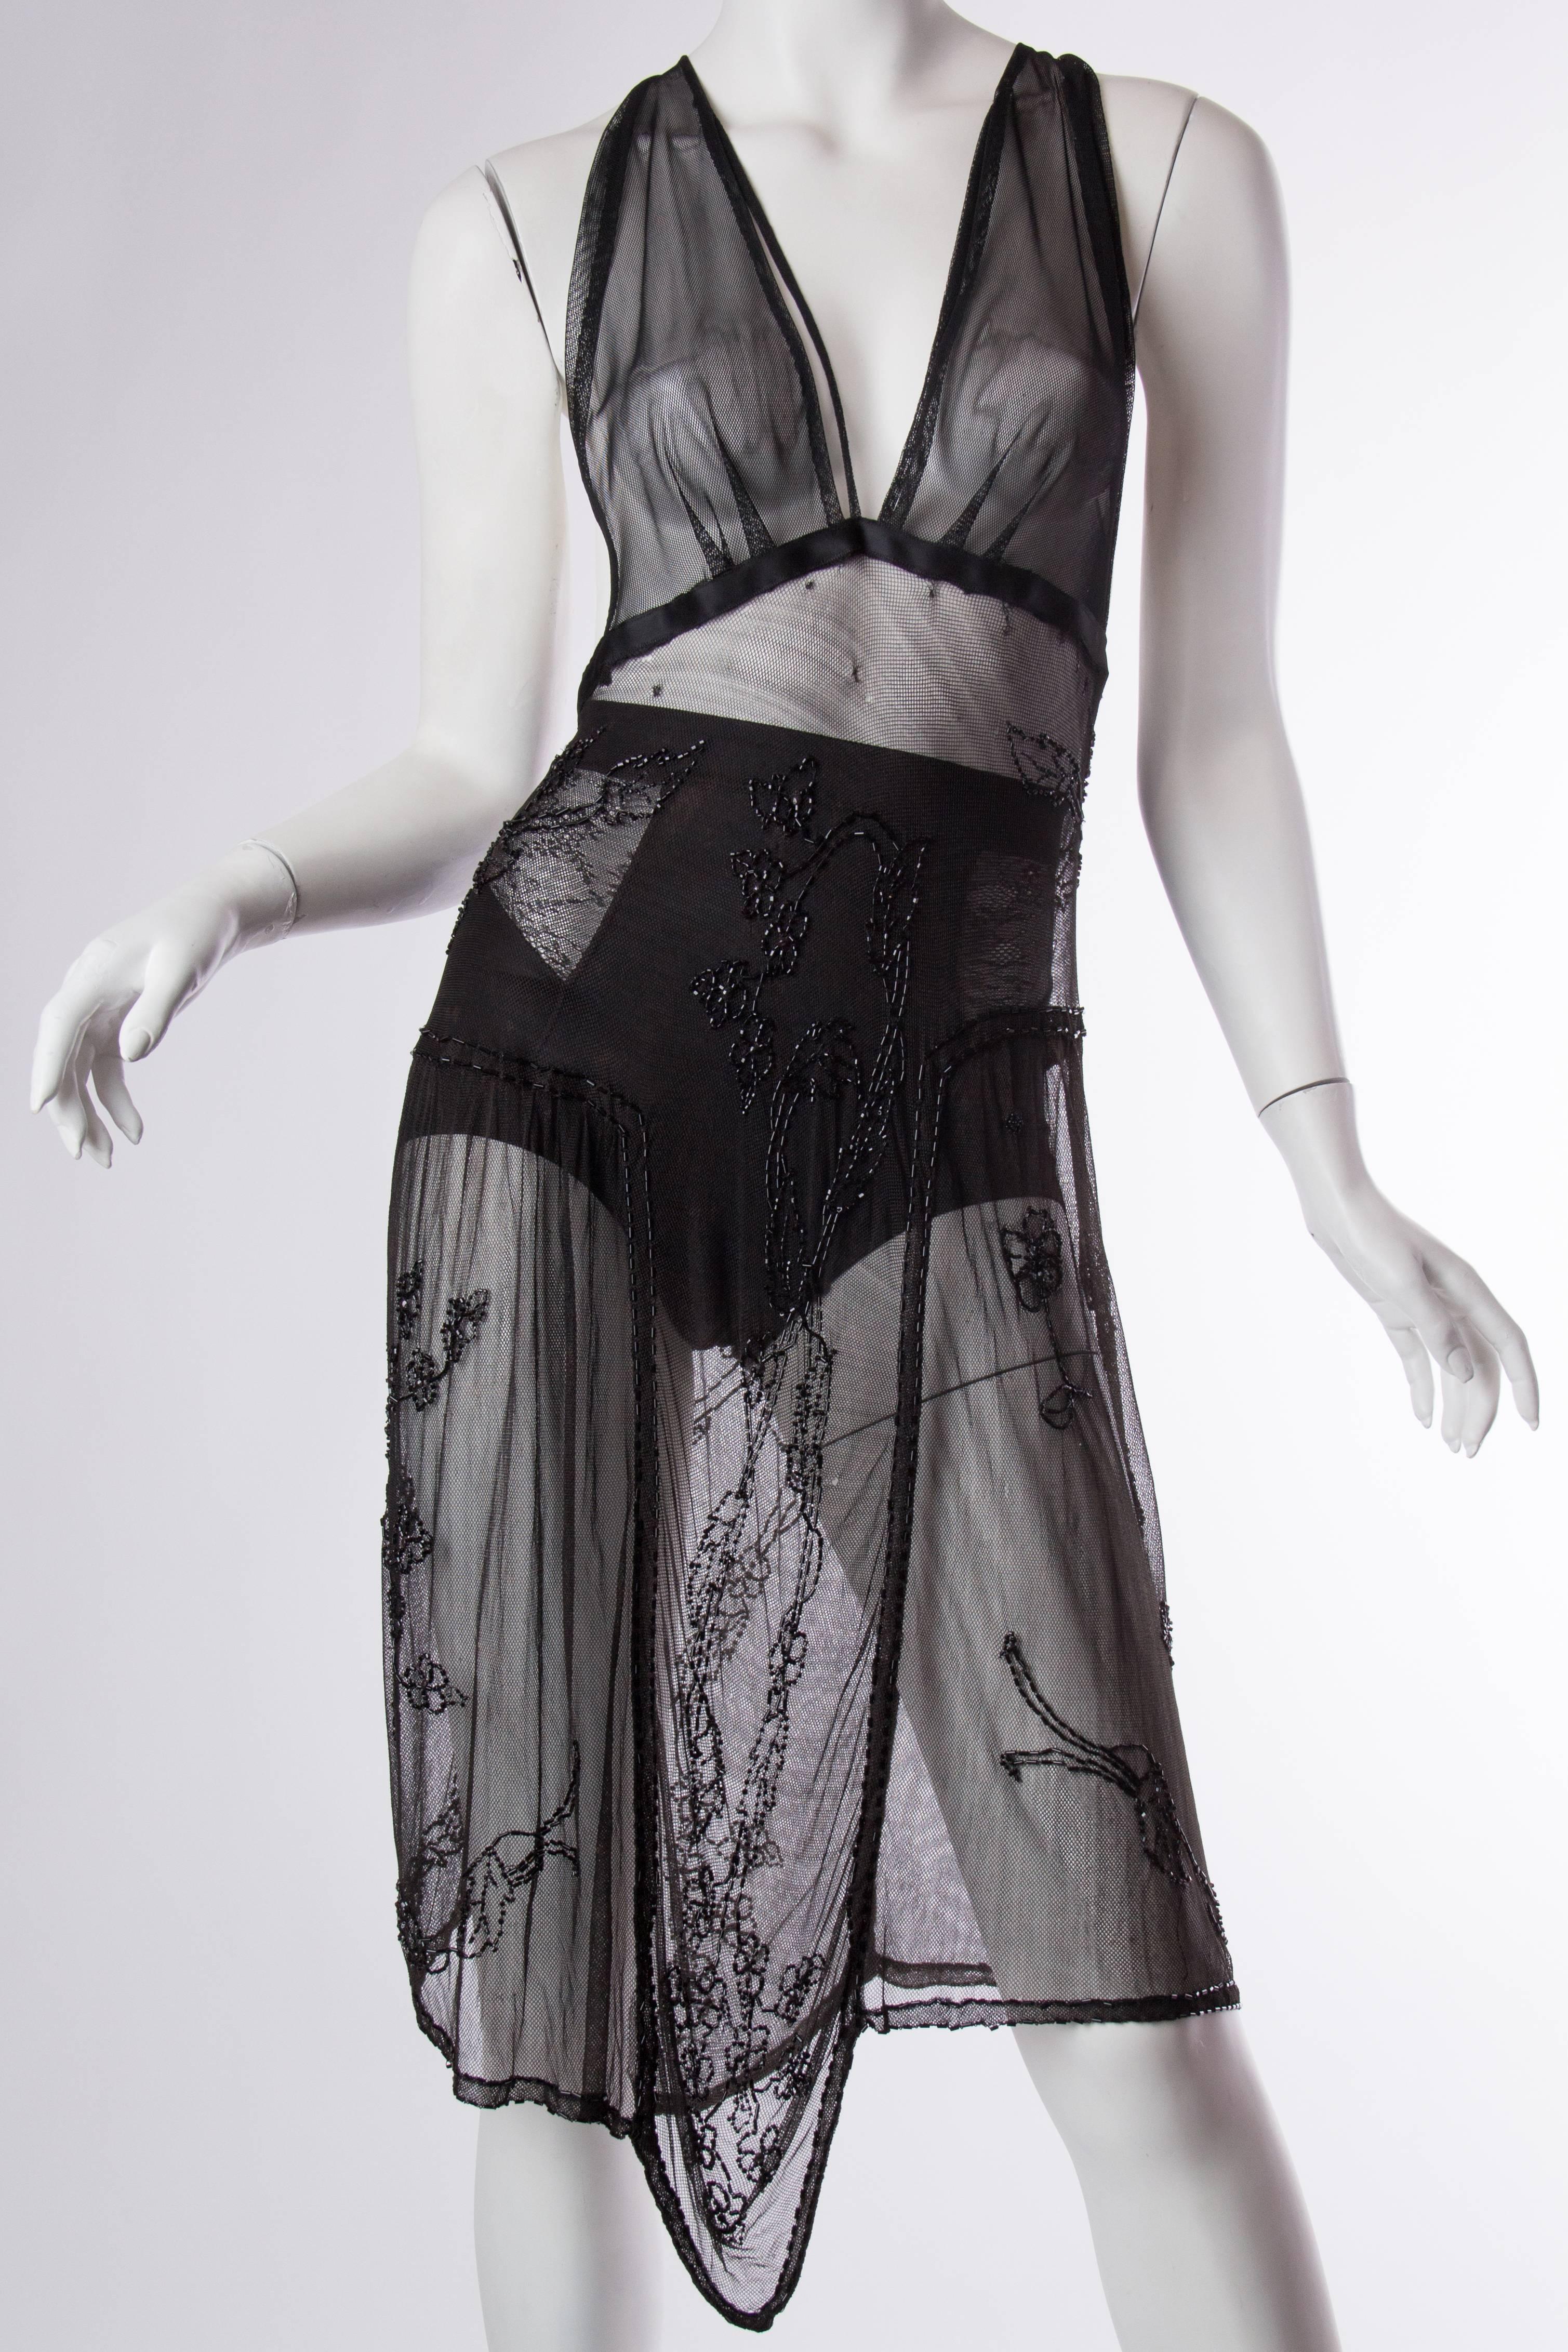 MORPHEW COLLECTION Black Hand Beaded Silk Tulle Sheer Dress Made W/ Edwardian Lace From 1910
MORPHEW COLLECTION is made entirely by hand in our NYC Ateliér of rare antique materials sourced from around the globe. Our sustainable vintage materials